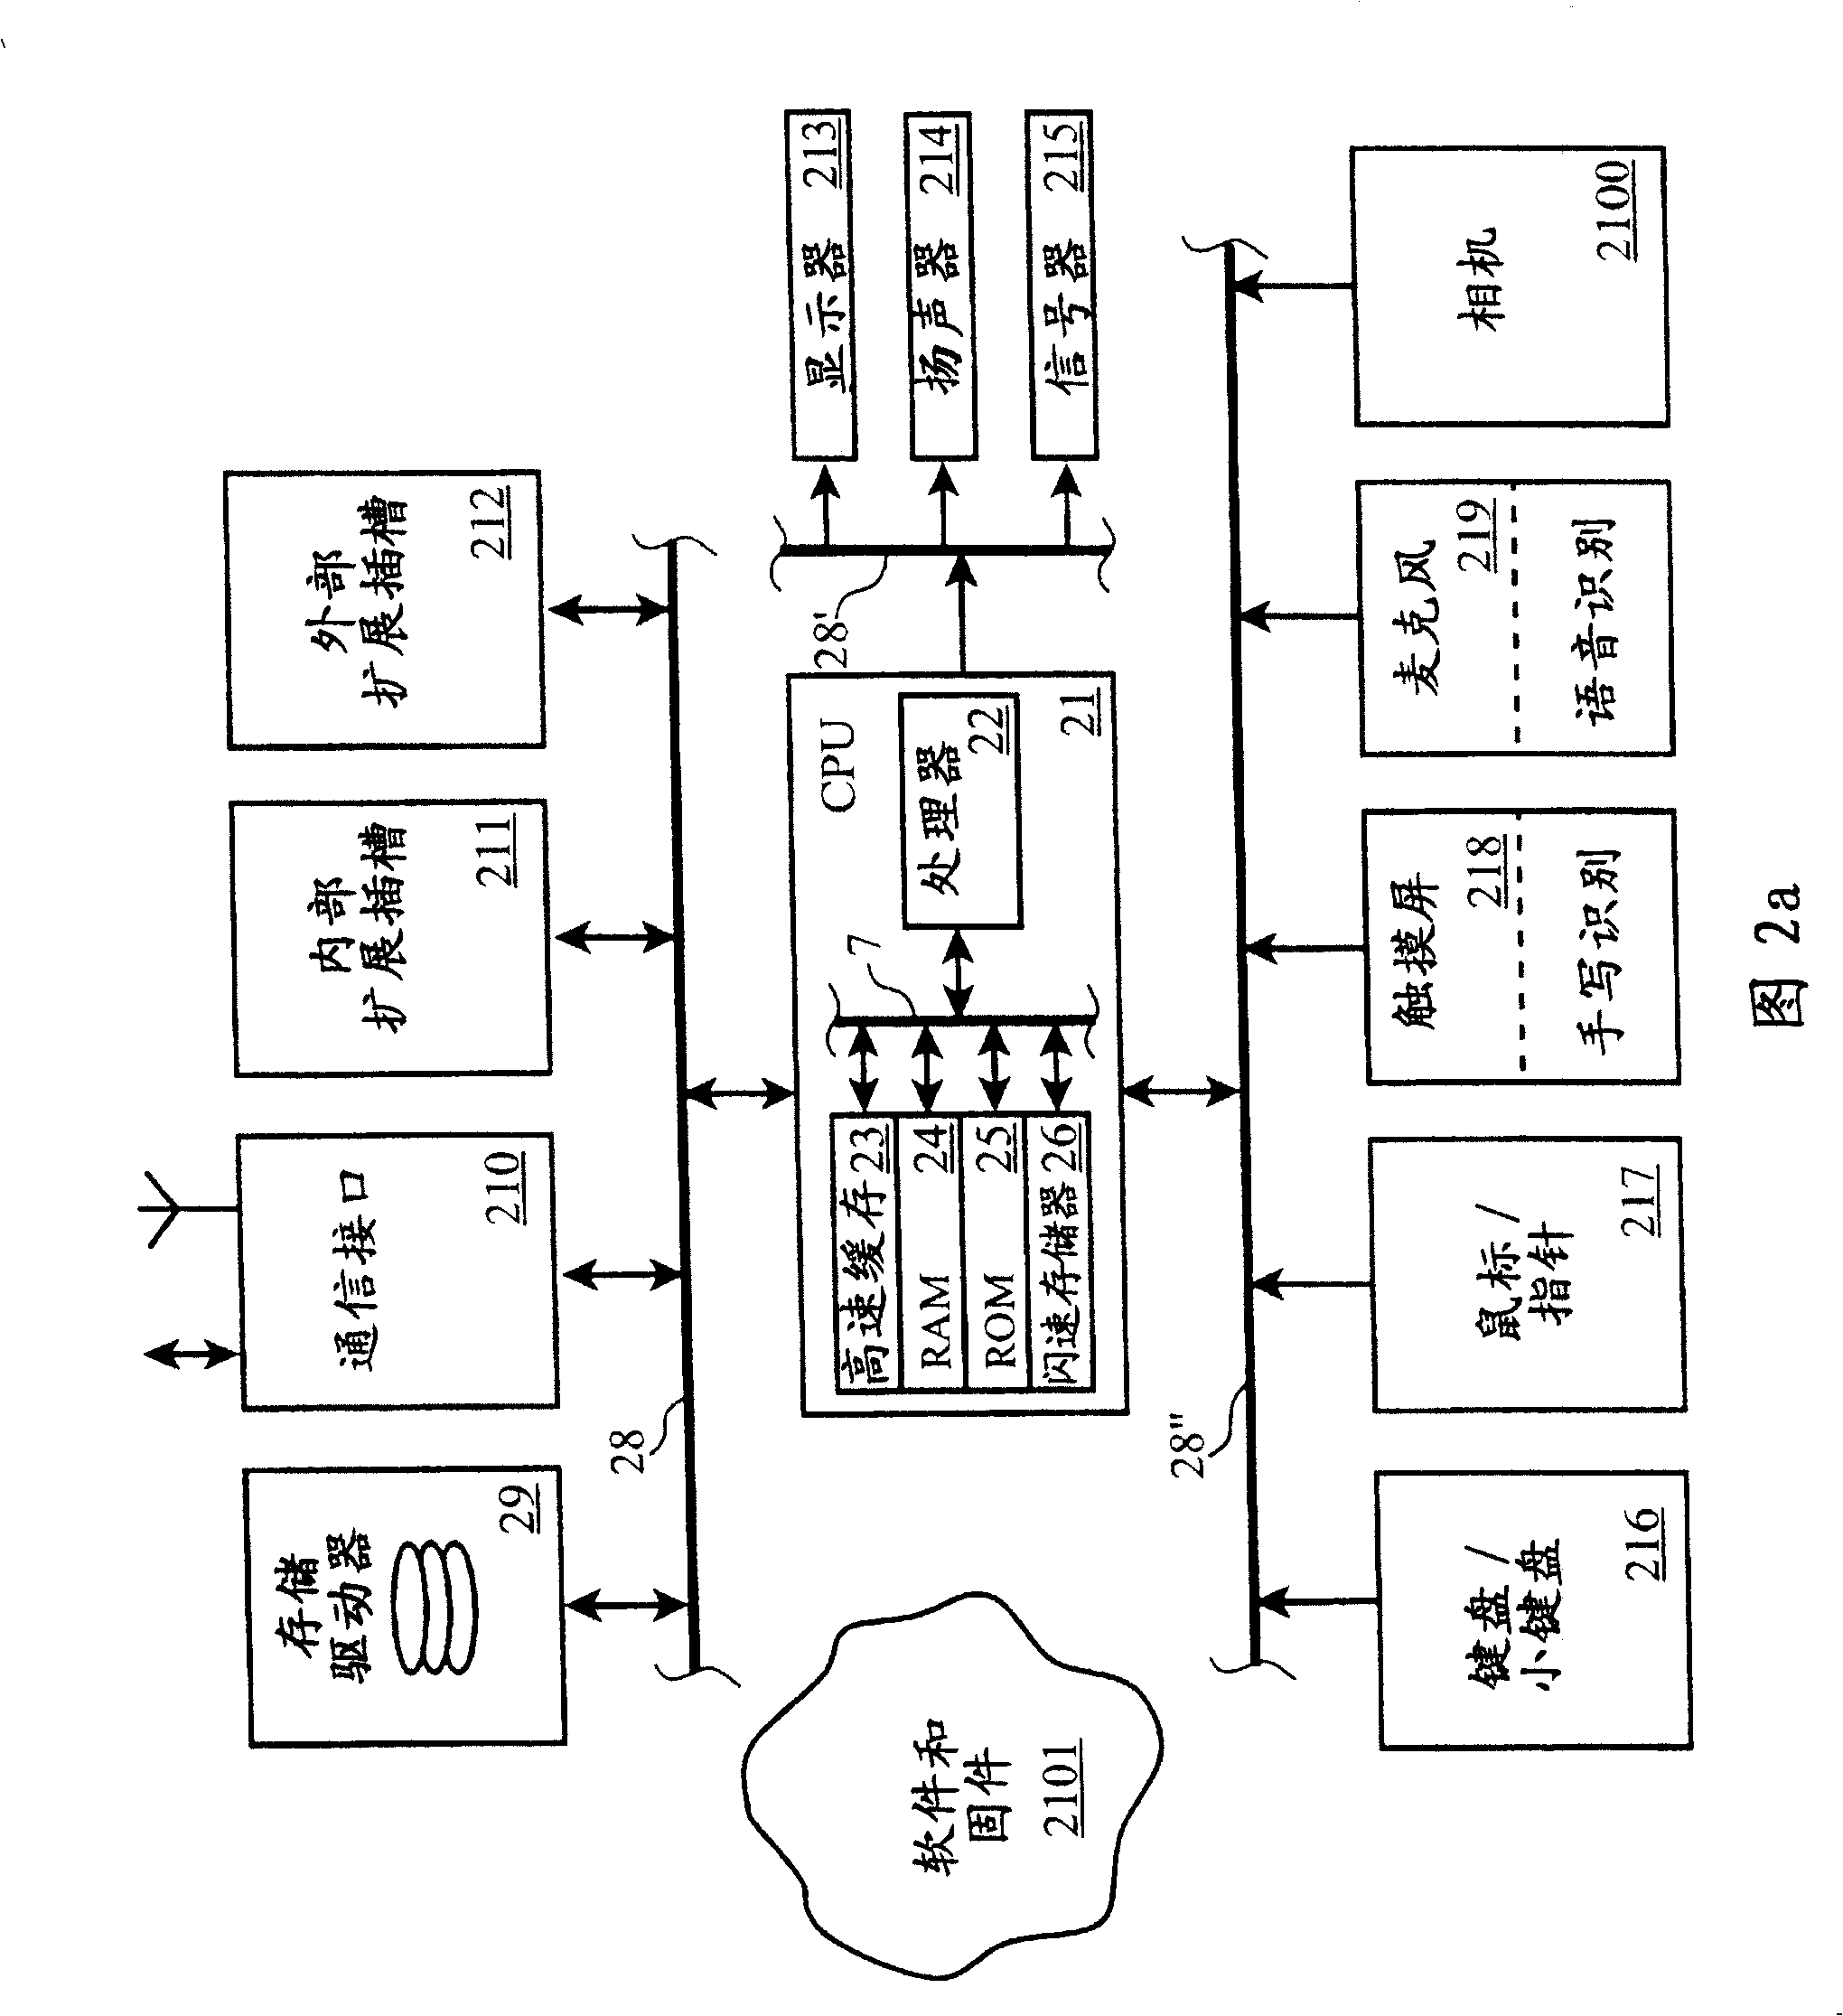 Self-optimizing network attached storage method and system for multiple geographic locations